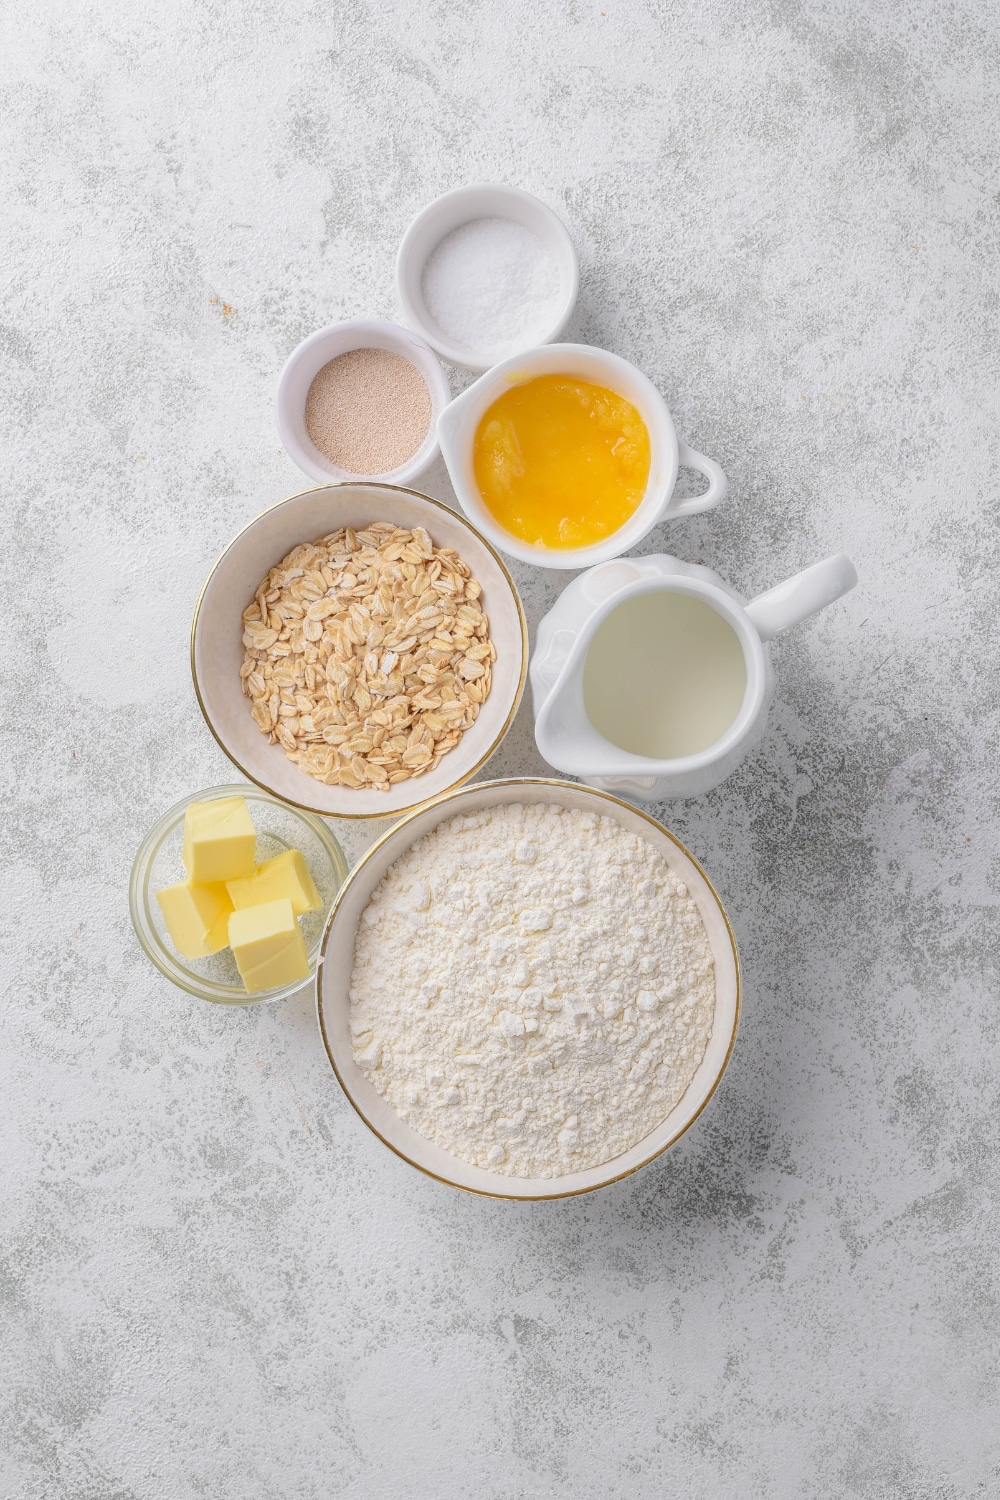 An overhead shot of several bowls of various shapes and sizes holding ingredients for oat bread such as oats, flour, yeast, eggs, milk, and butter.